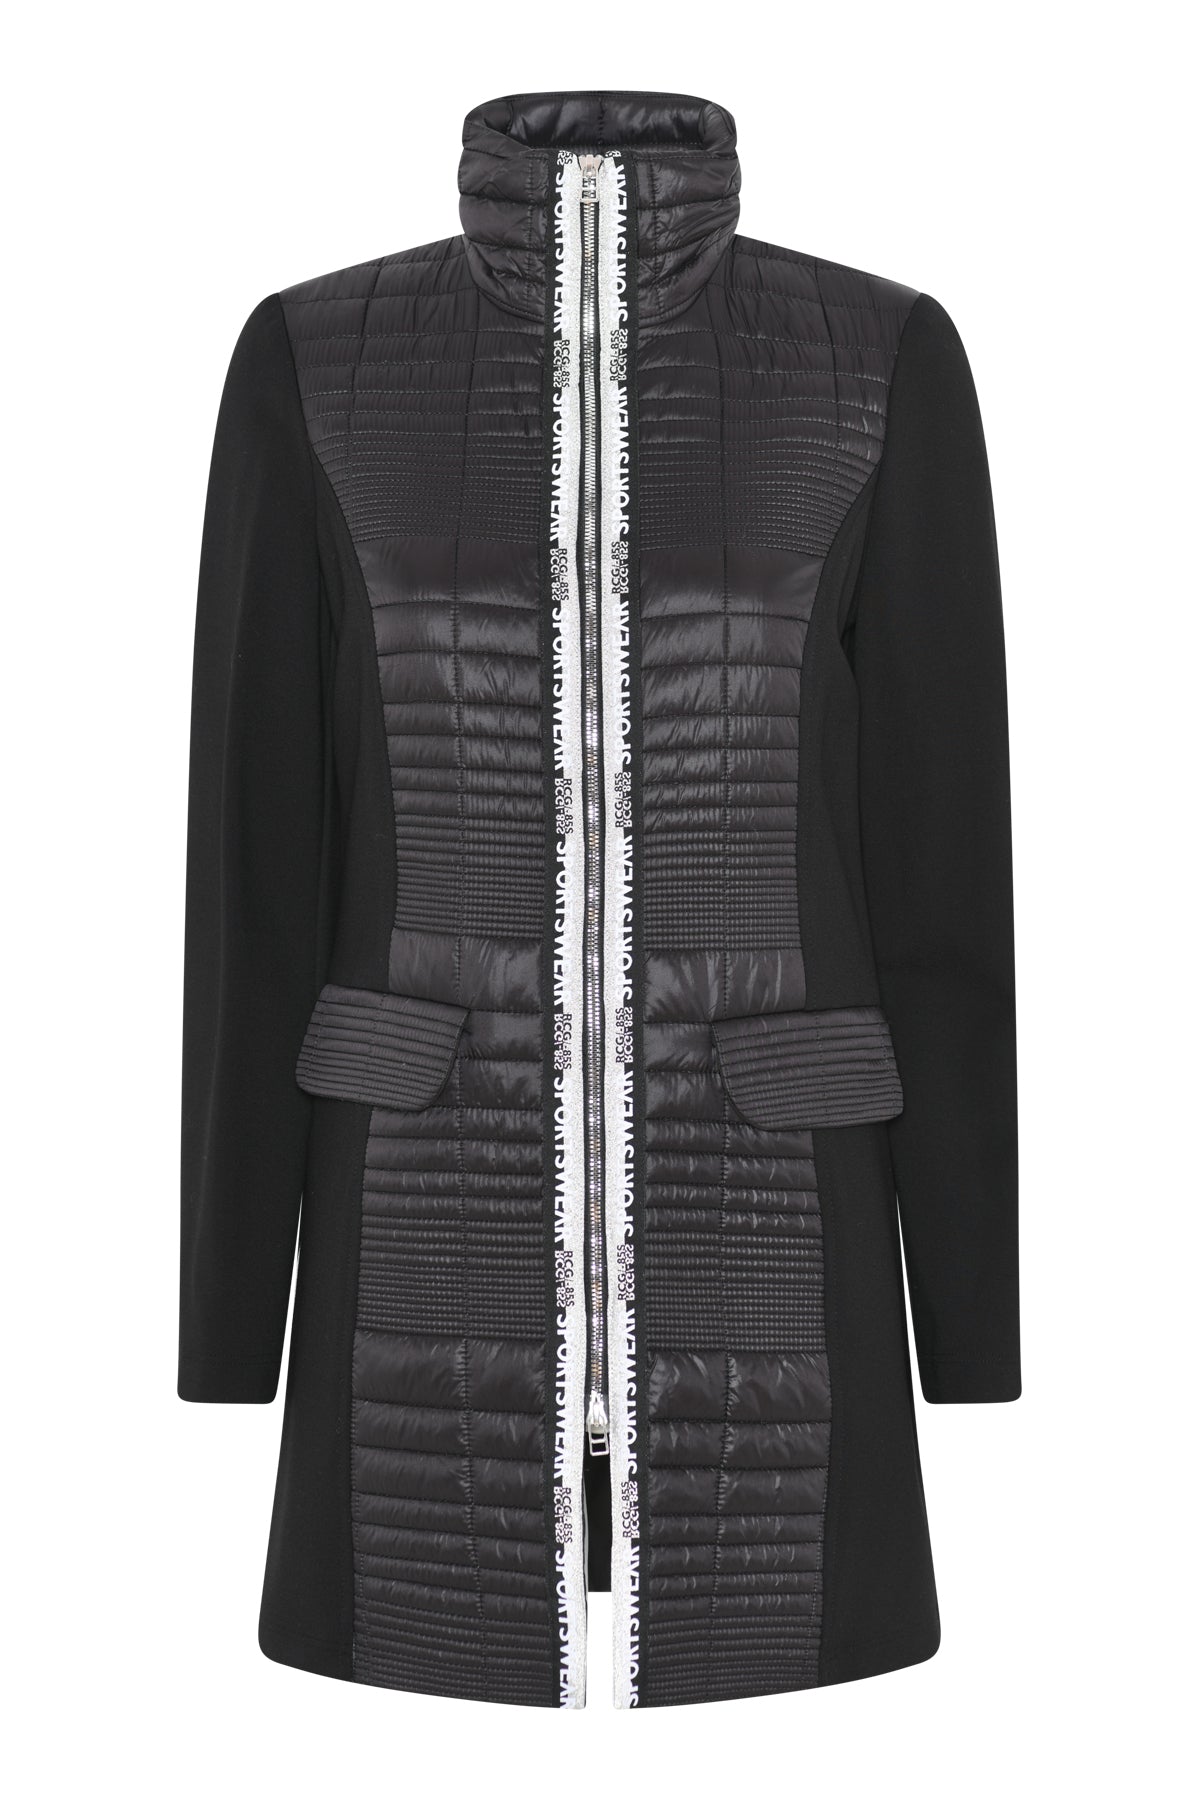 Black Jacket with Silver Detail and Pockets